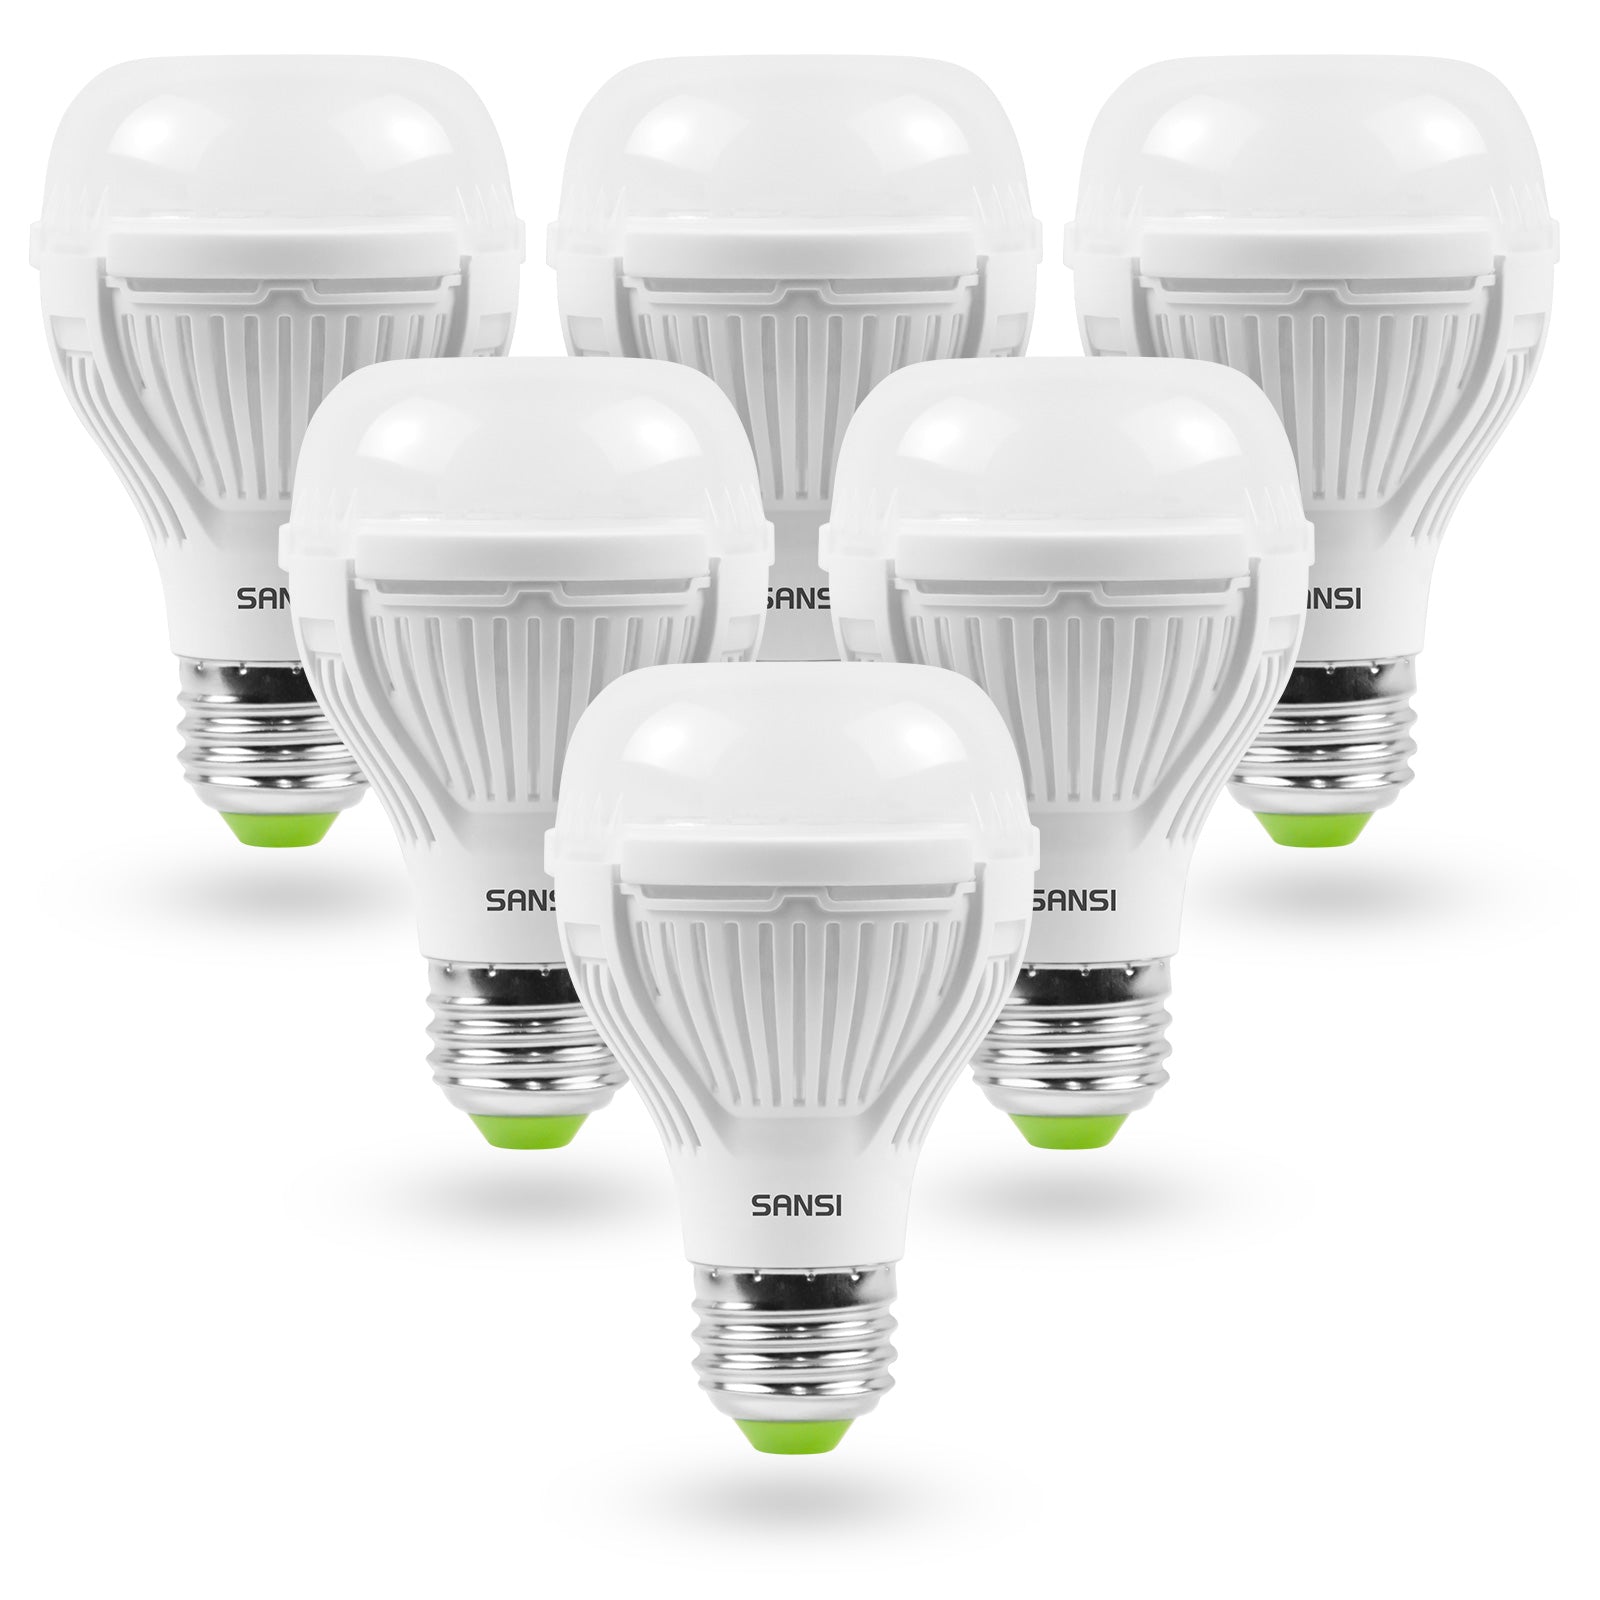 Upgraded A19 13W led light bulb with energy efficient for bedroom, 6 pack